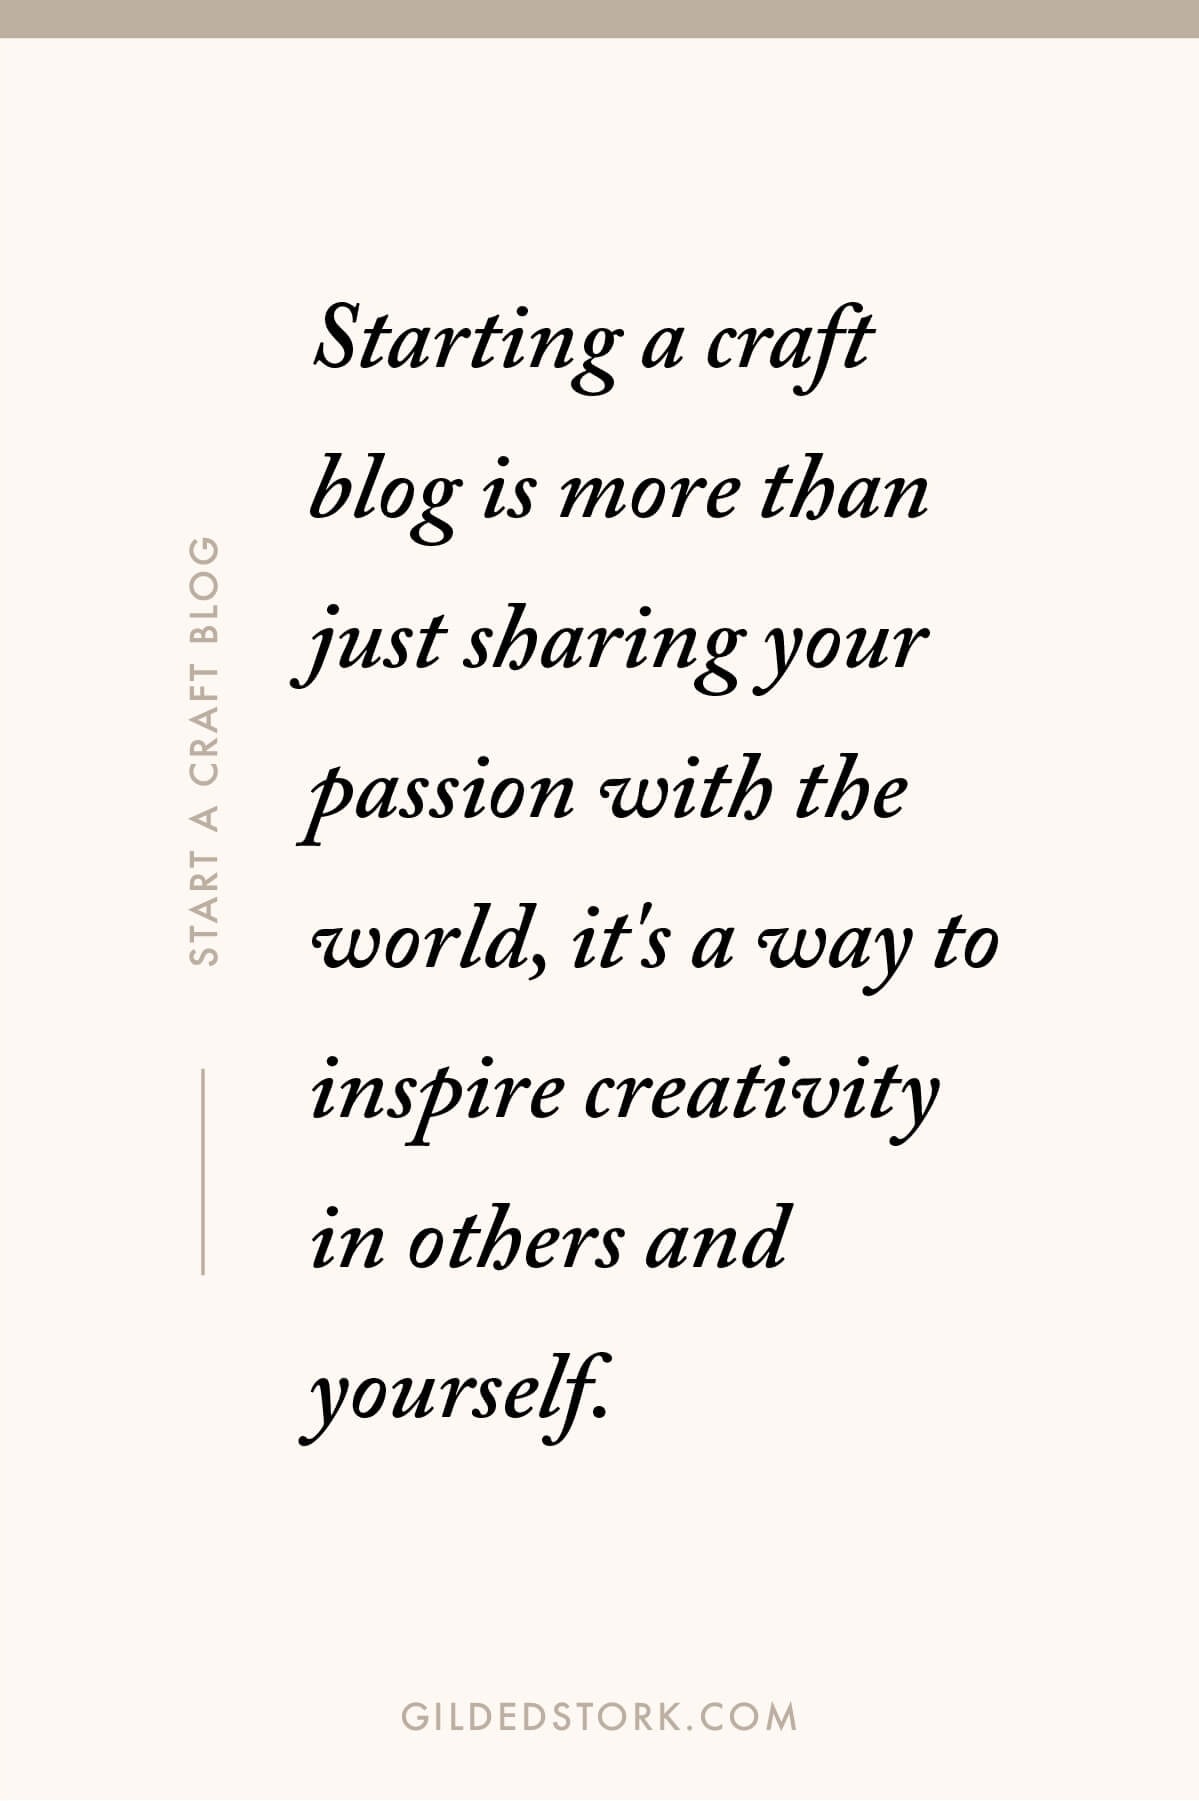 Inspire creativity by starting a craft blog